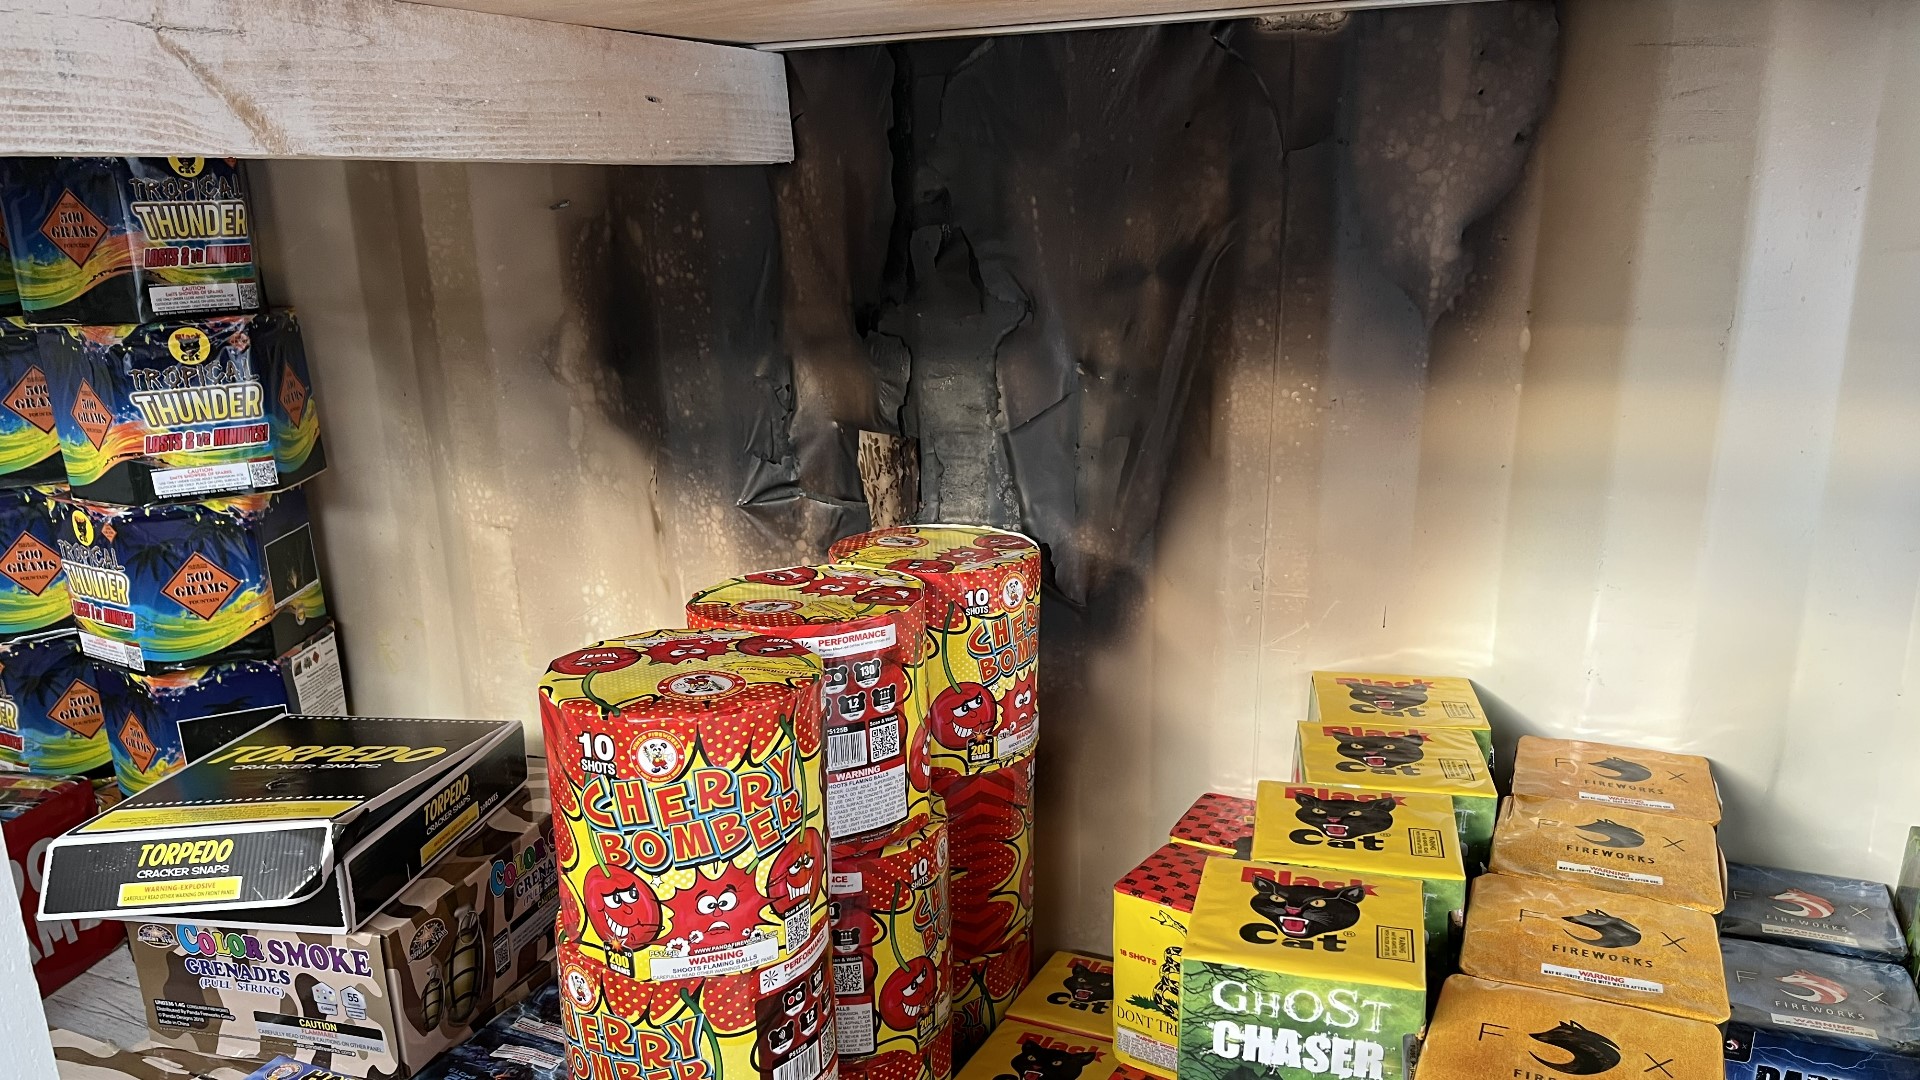 Julian David Guevara is accused of setting a fireworks stand on fire in the Cypress area on Tuesday.